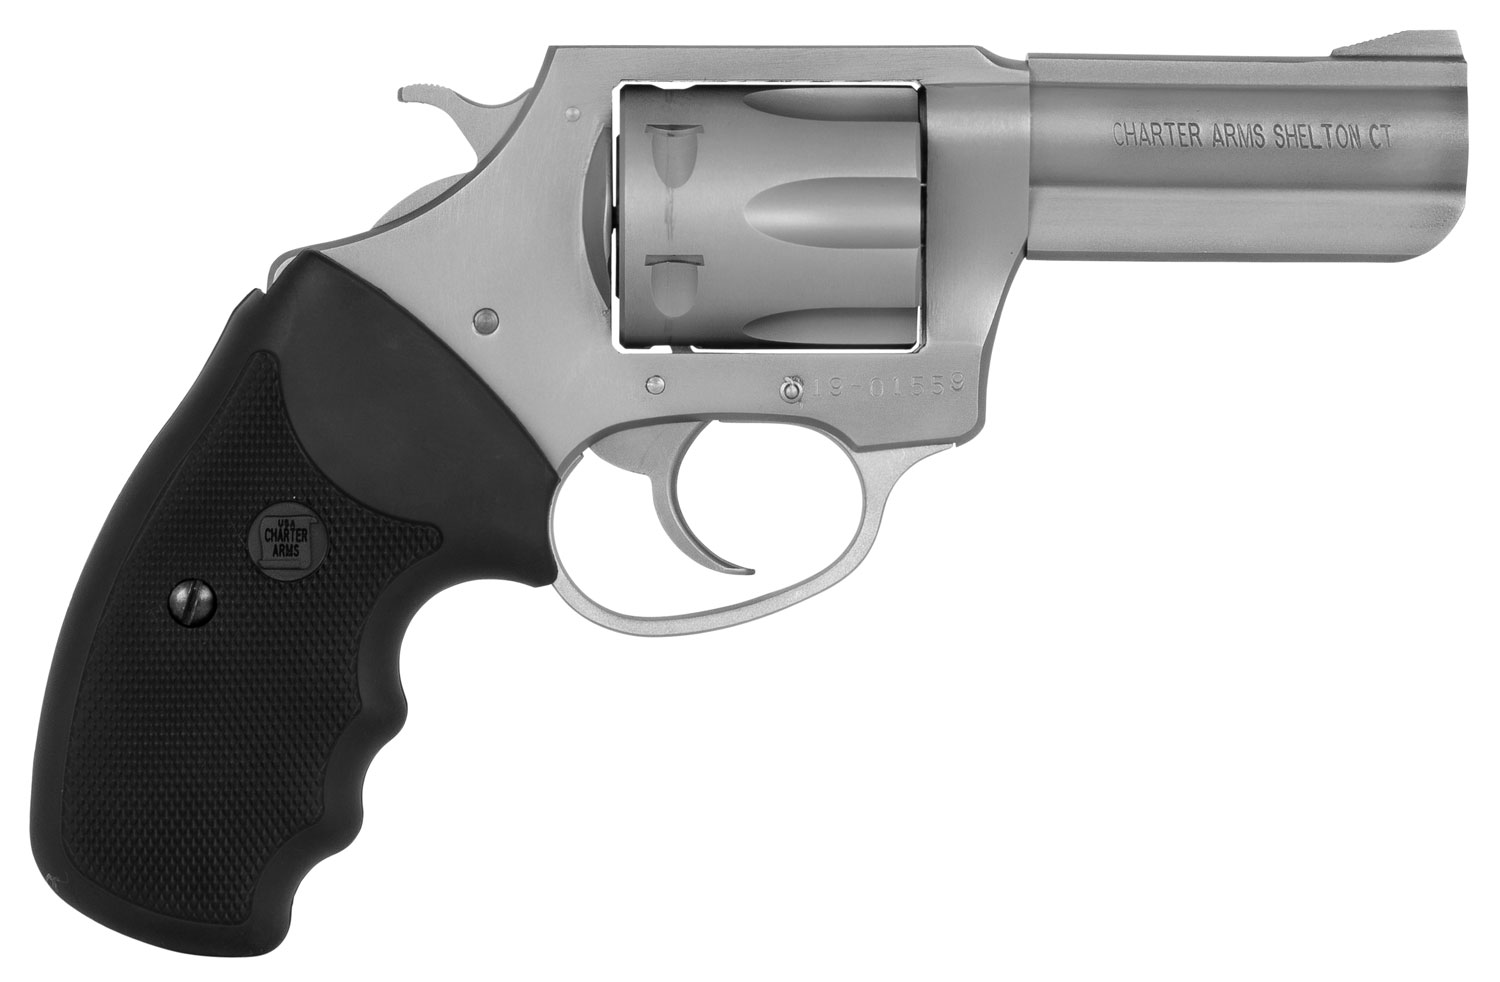 CHARTER ARMS 73802 PIT BULL        380 3.0    SS      6SHOT